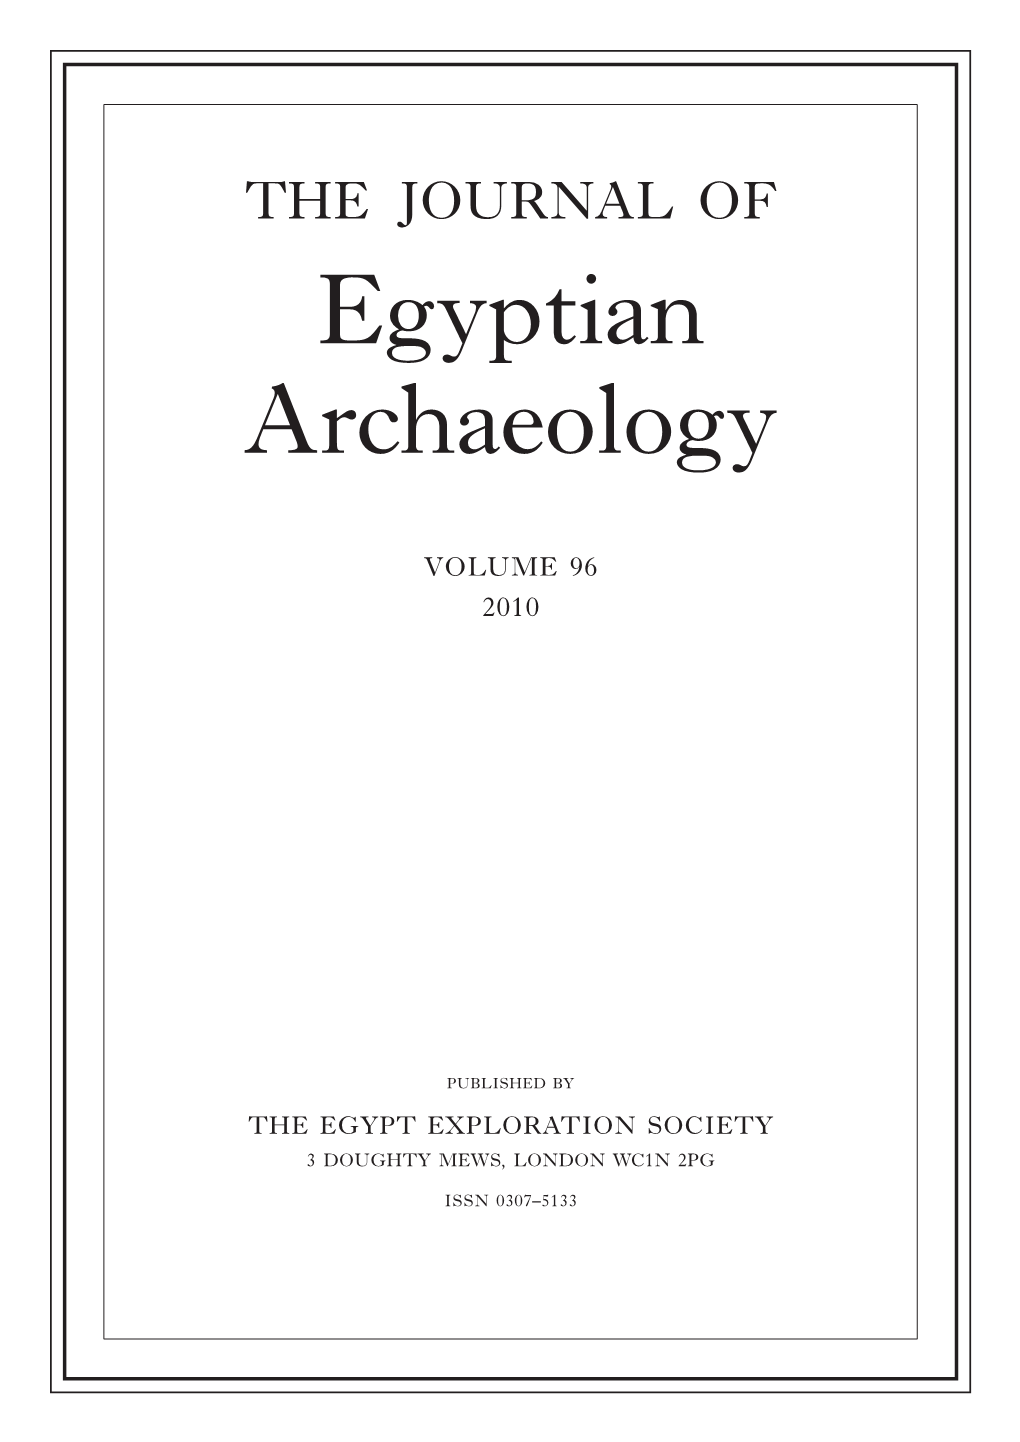 THE JOURNAL of Egyptian Archaeology